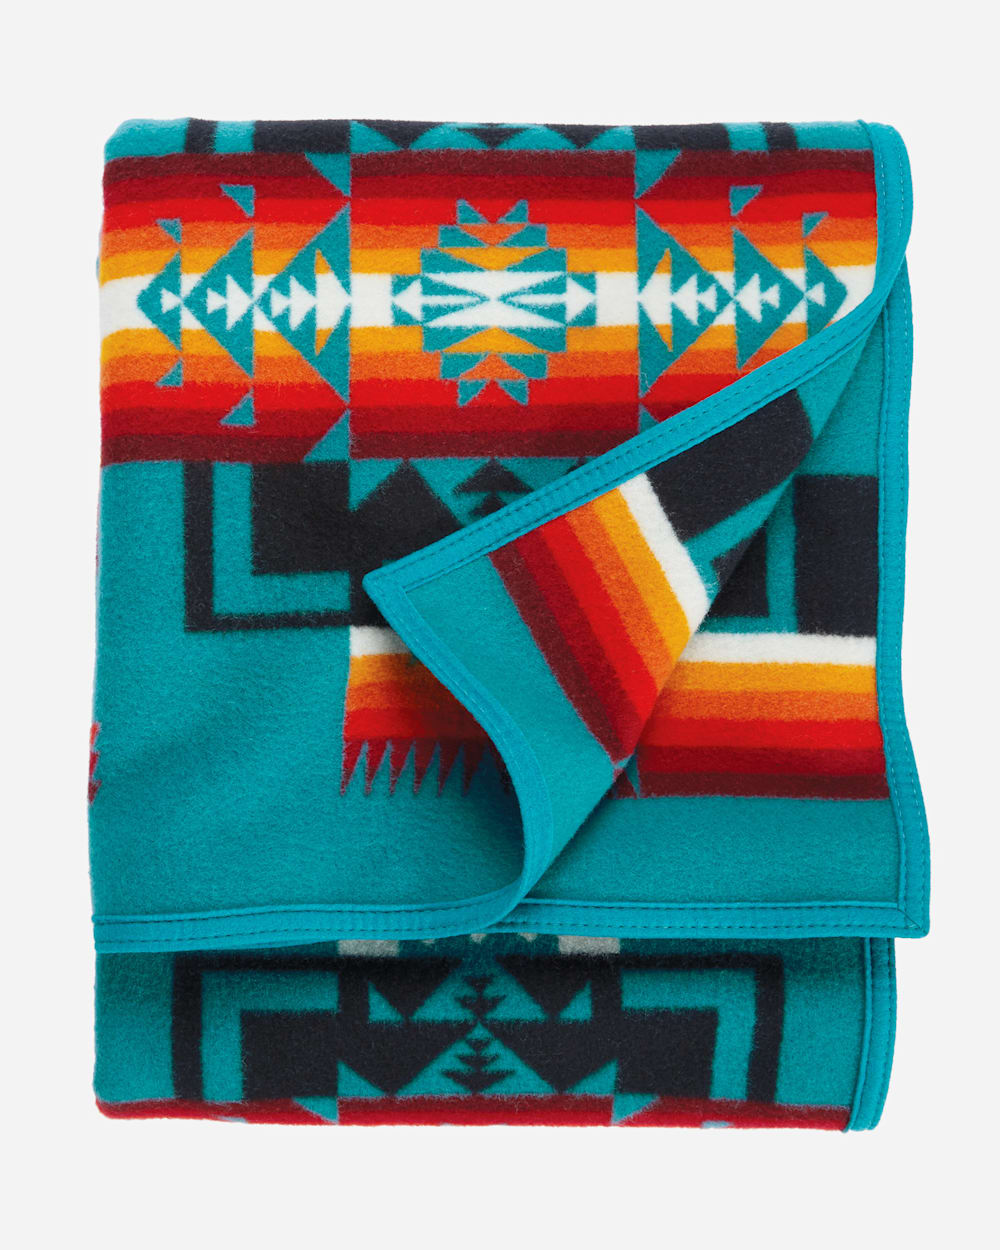 ADDITIONAL VIEW OF CHIEF JOSEPH BLANKET IN TURQUOISE image number 3